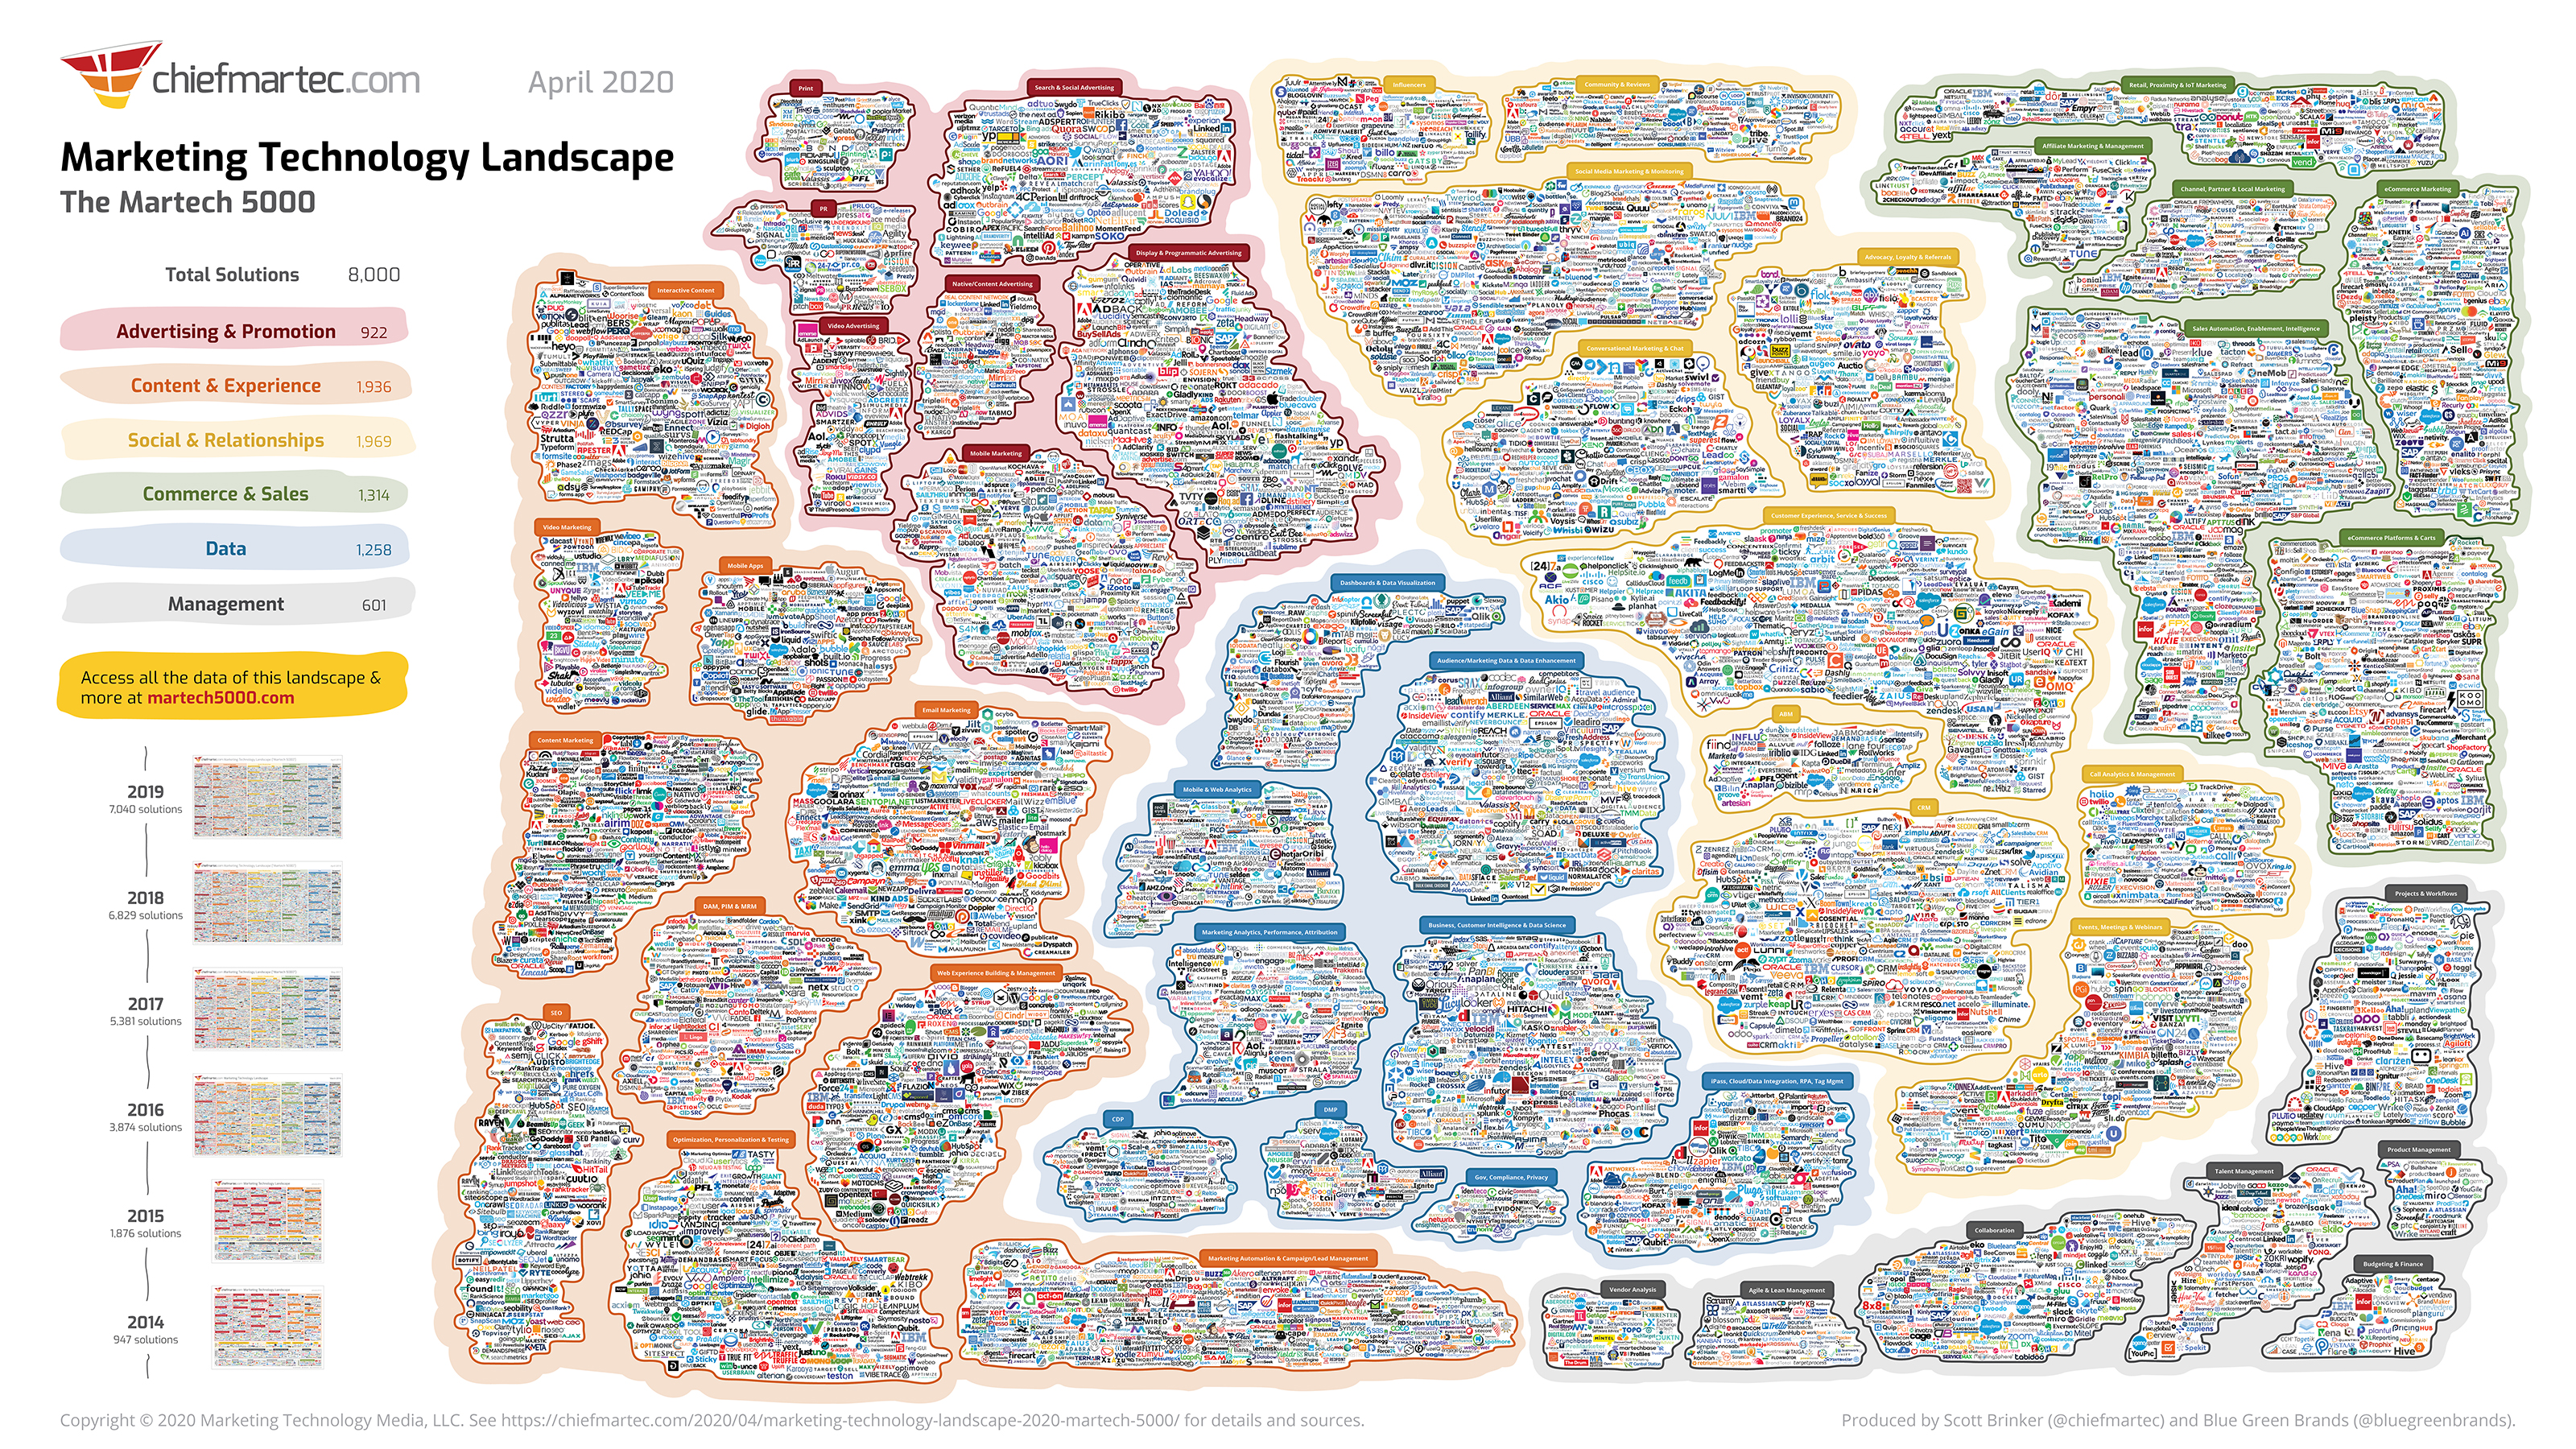 The MarTech5000 Landscape, good luck reading it without a microscope